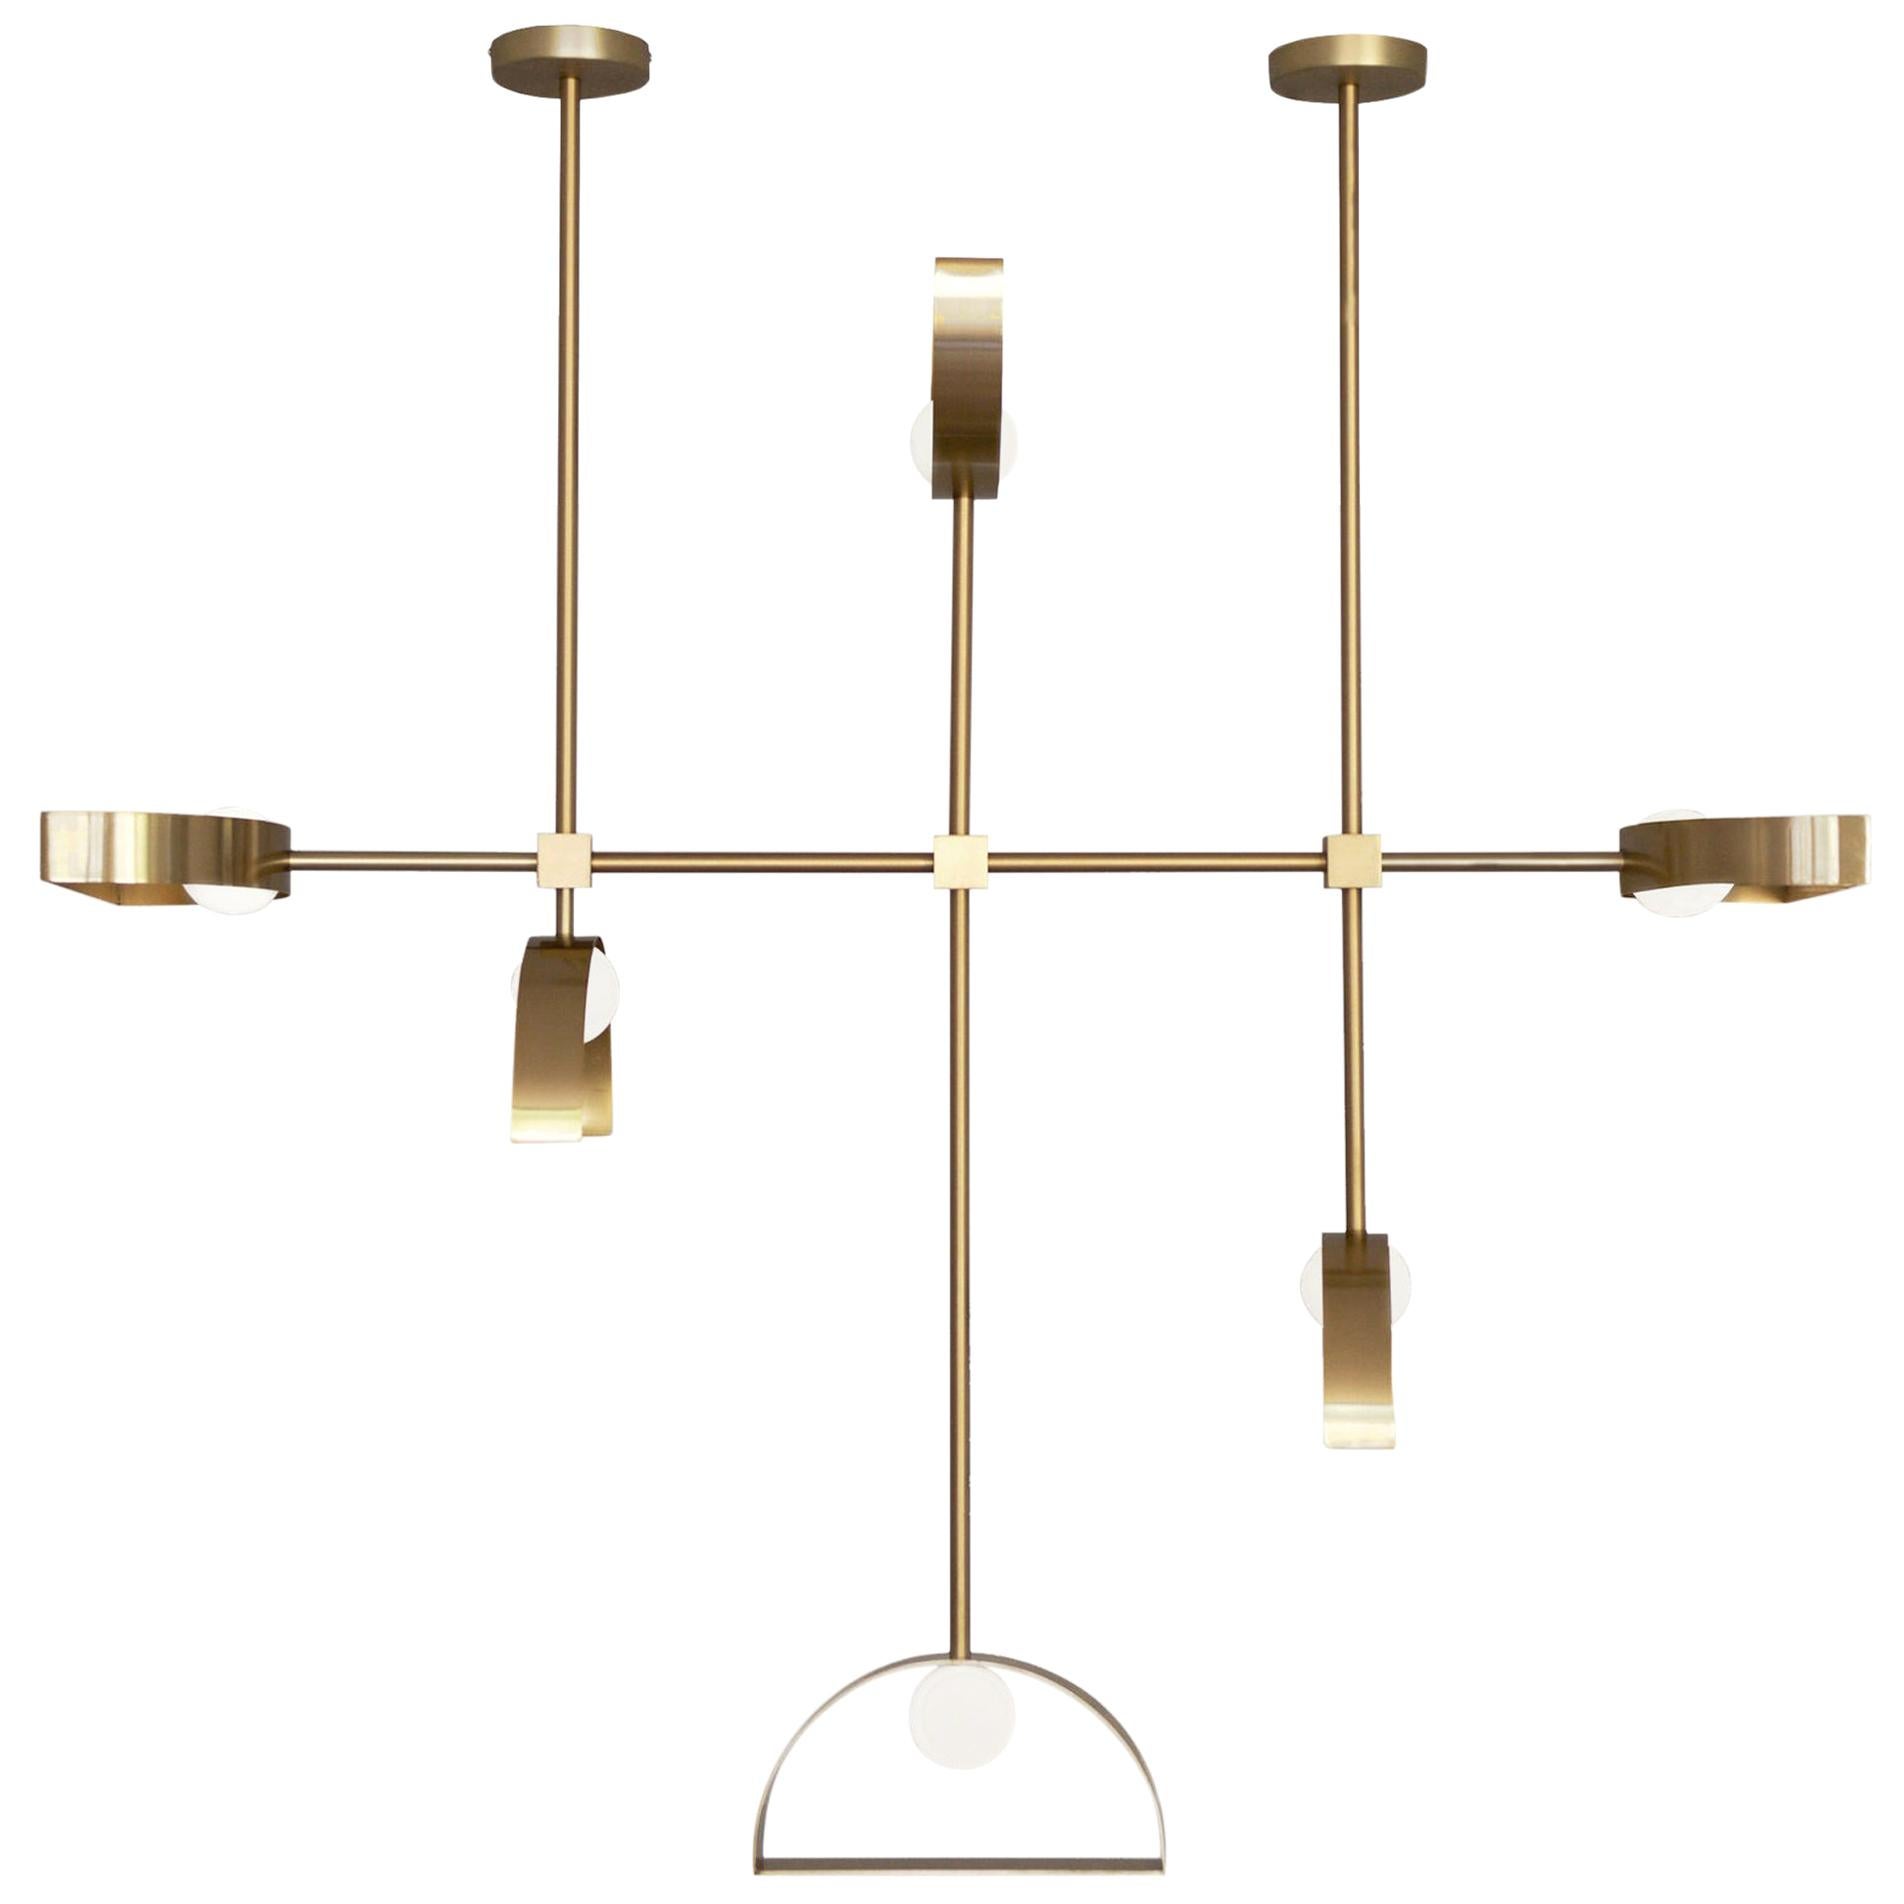 Brass "Sphere and Cut Circle" Pendant Lamp, Square in Circle